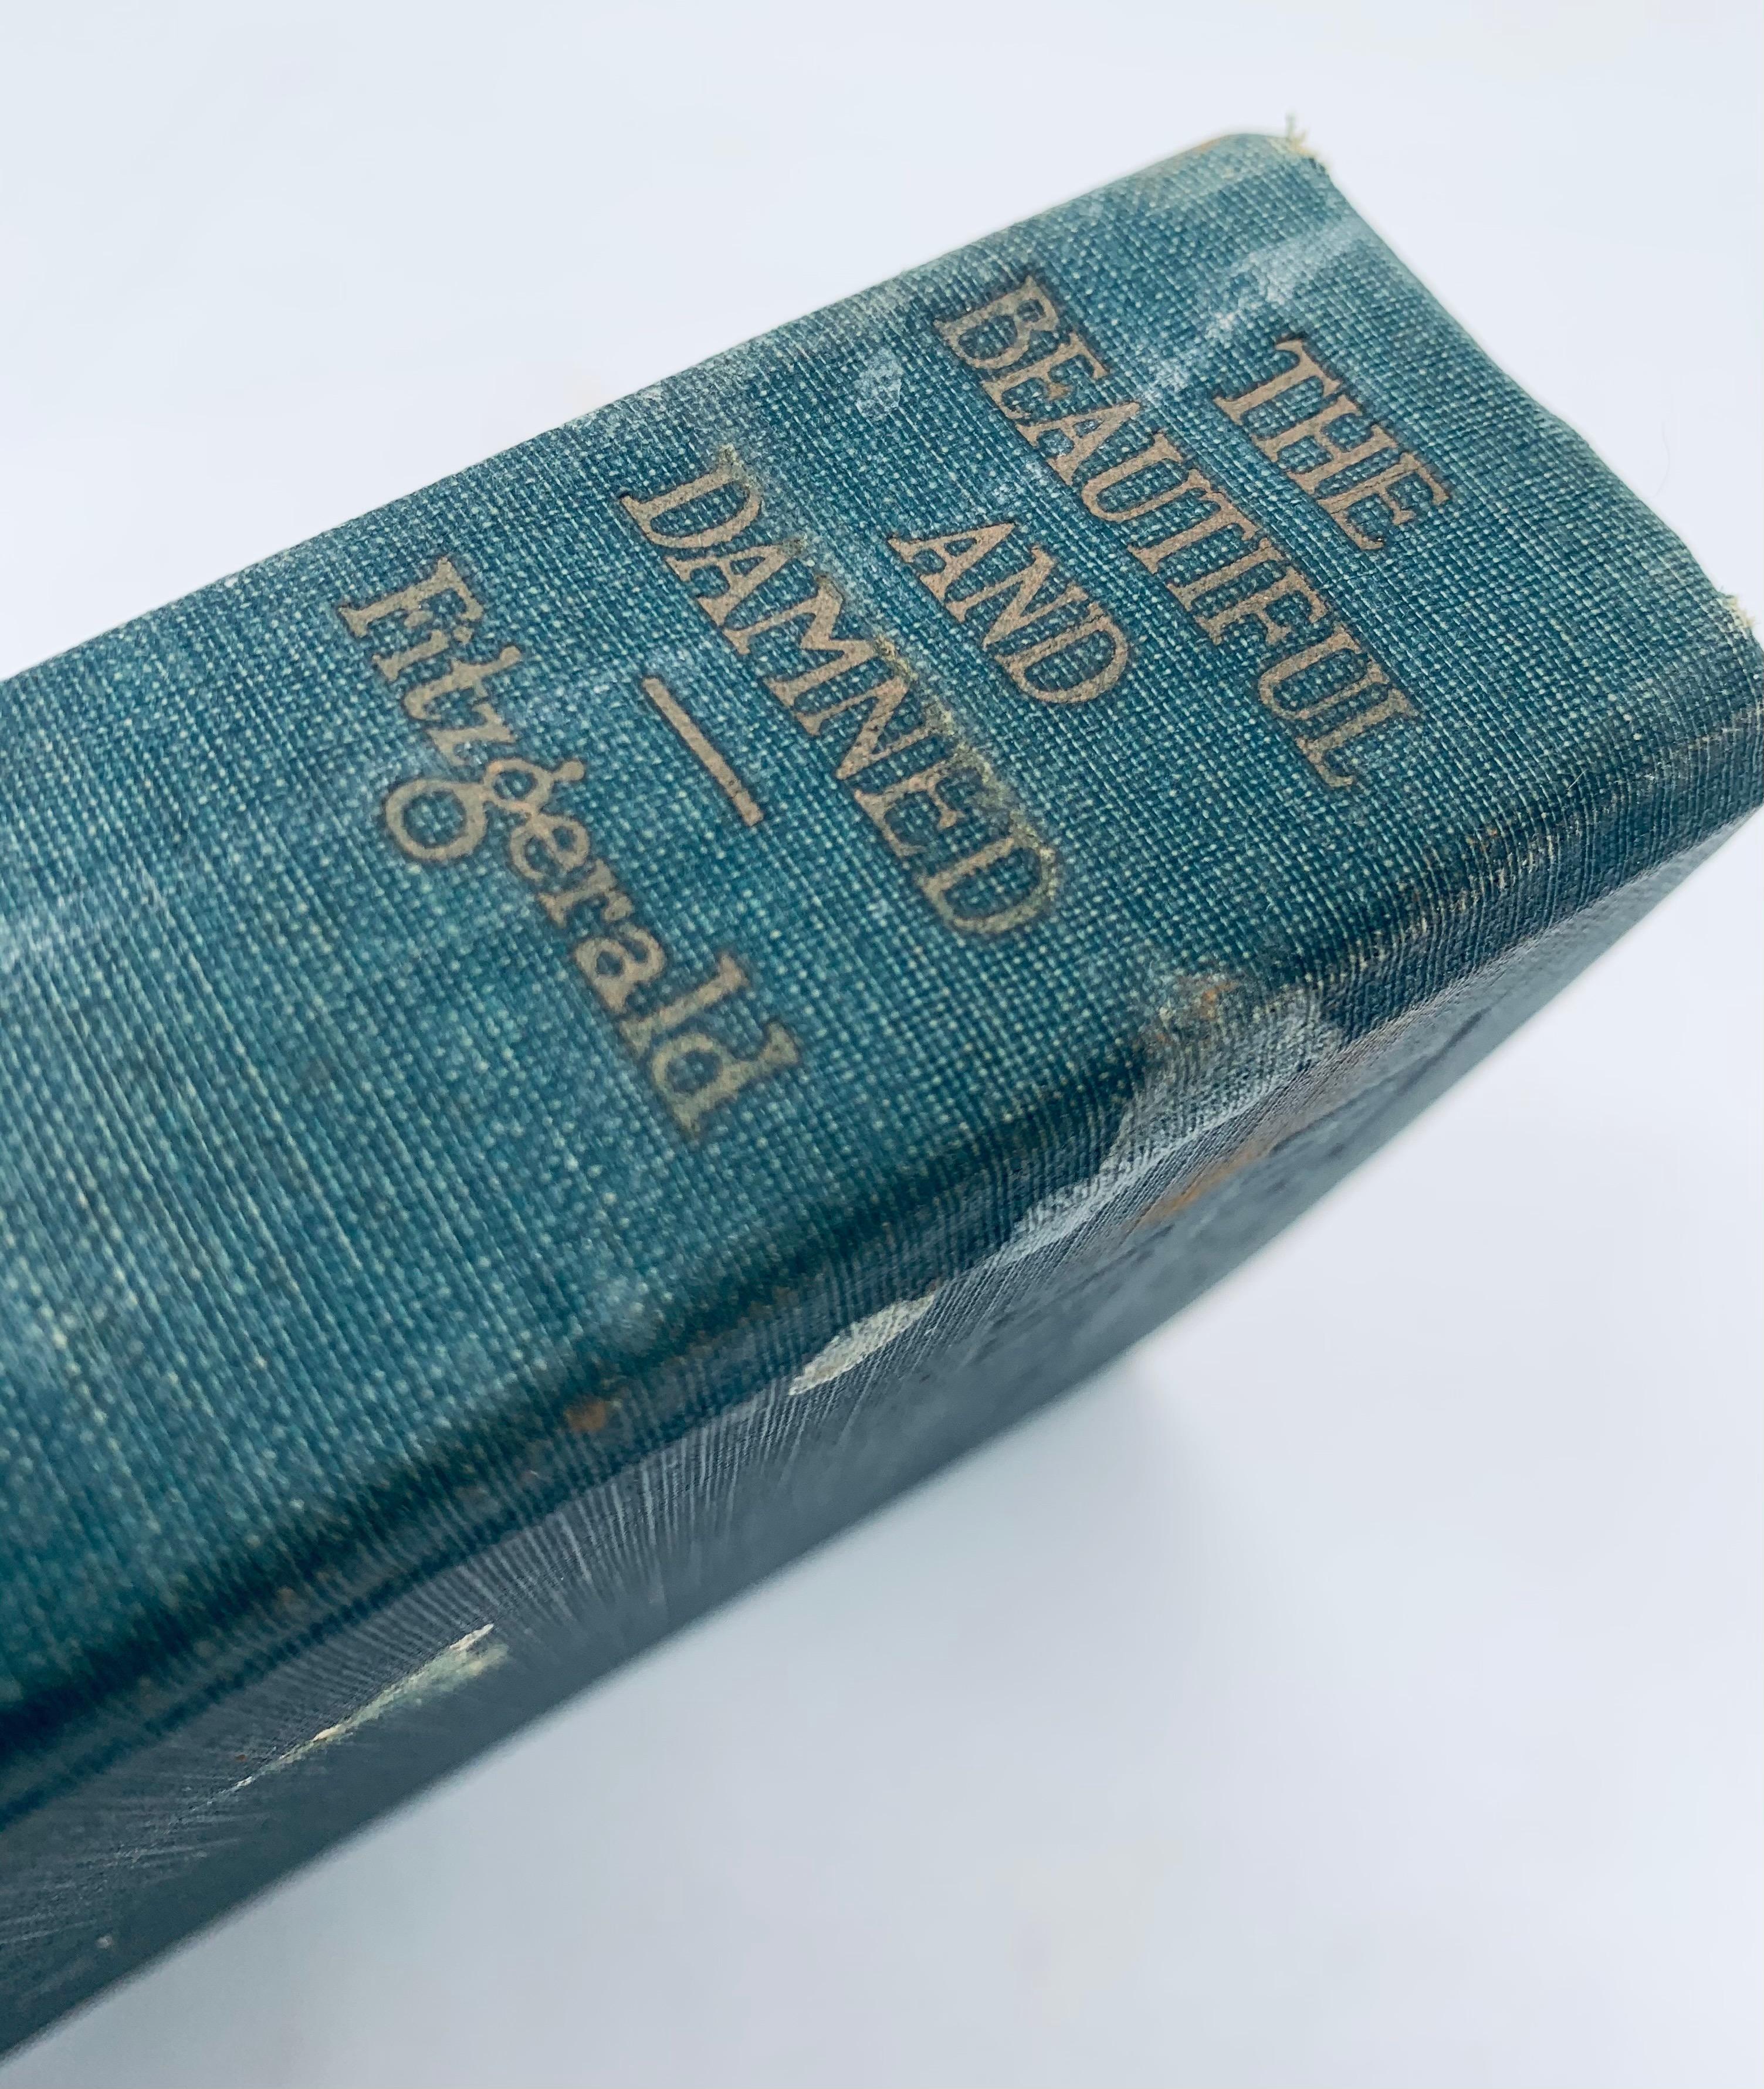 RARE The Beautiful and the Damned (1922) First Edition by F. SCOTT FITZGERALD